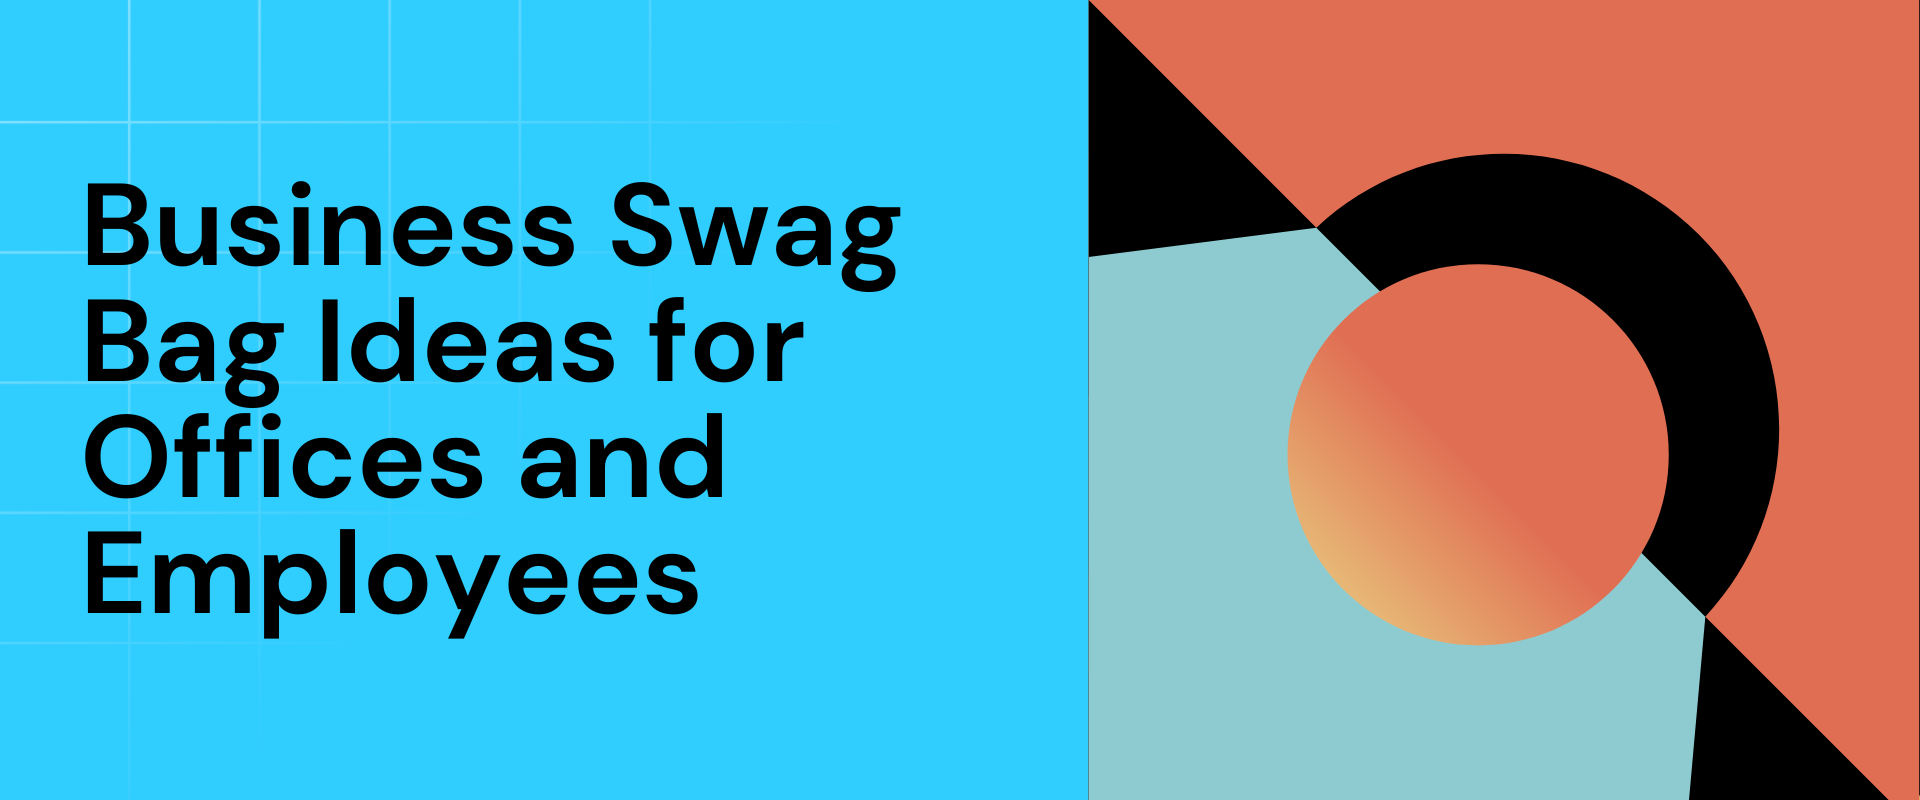 Business Swag Bag Ideas for Offices and Employees